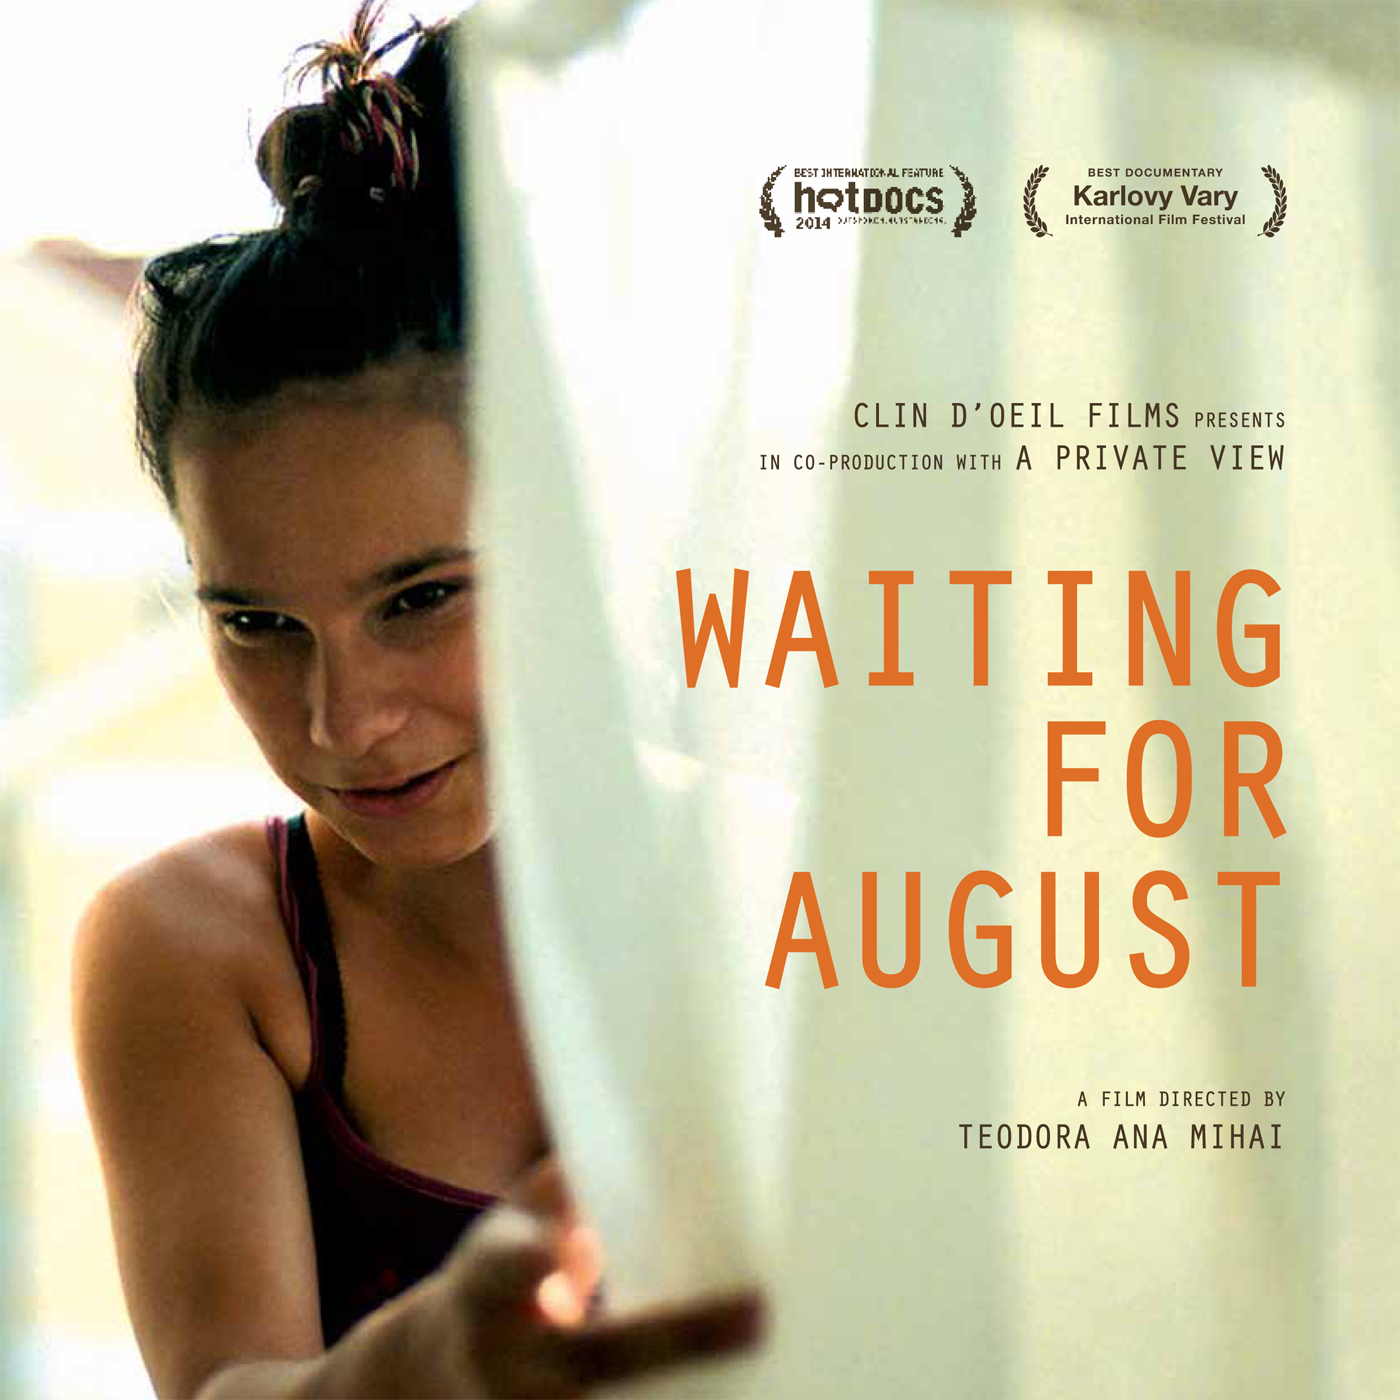 Waiting for August